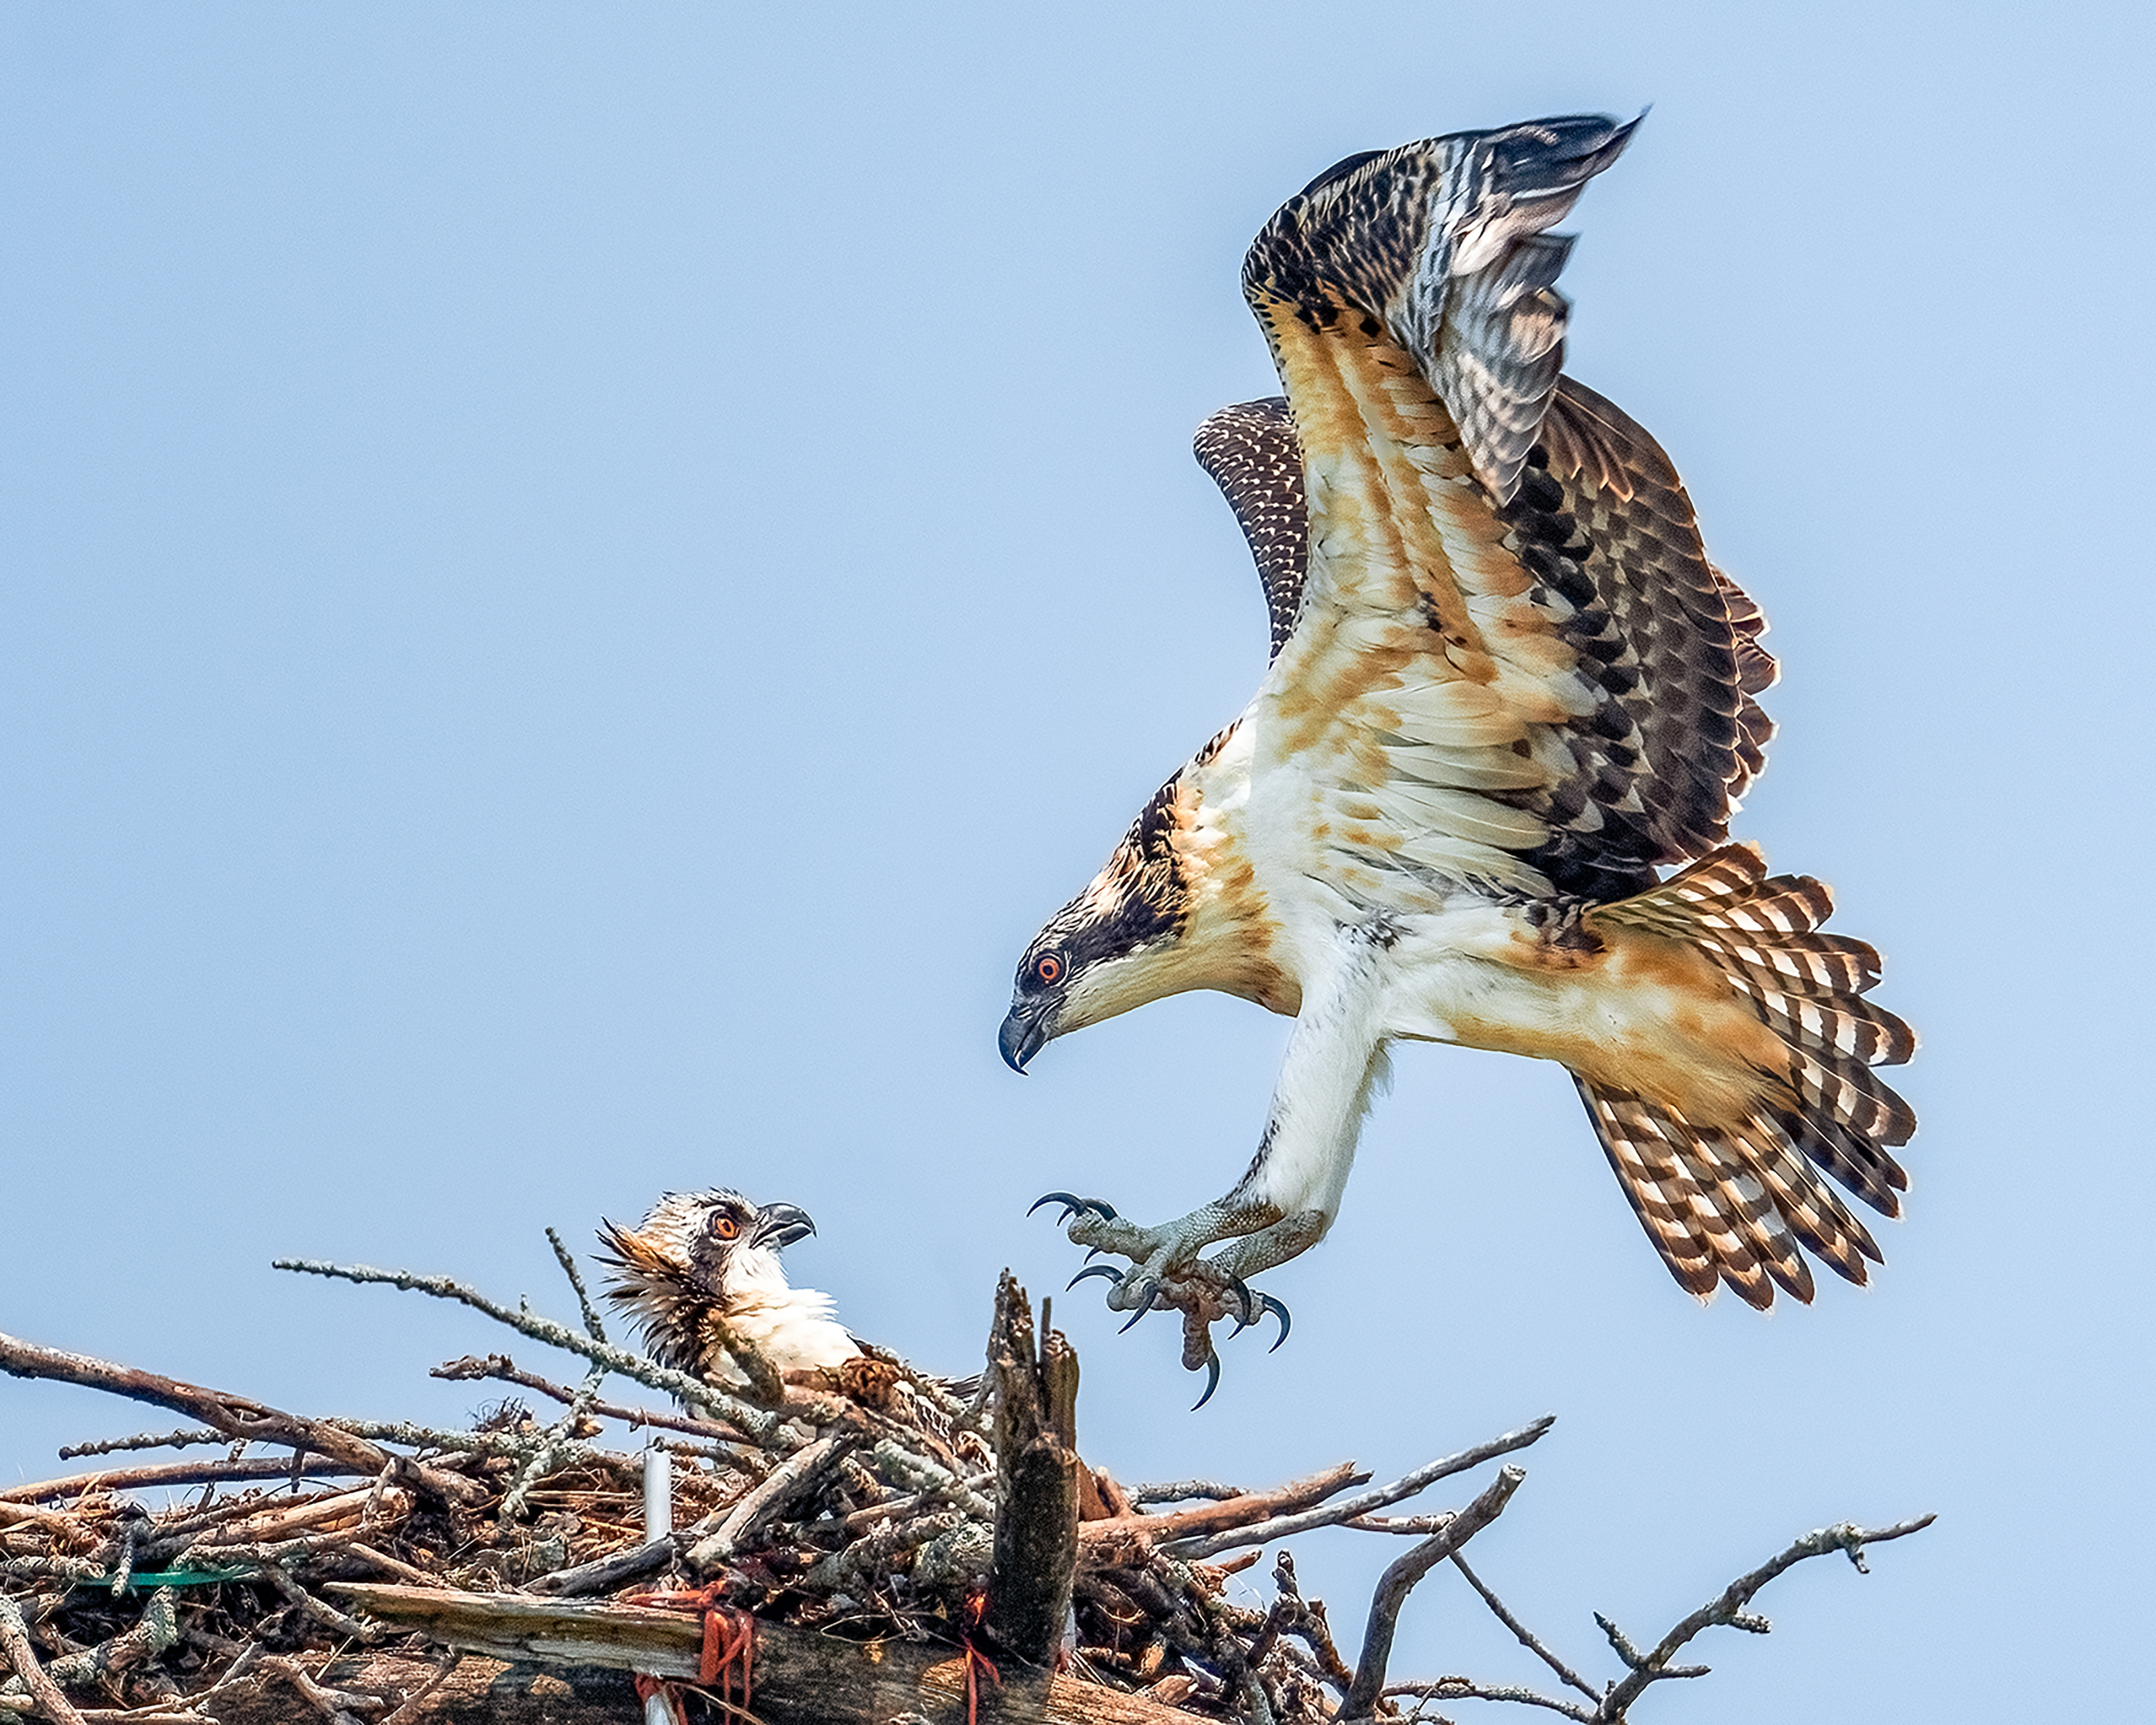 An osprey coming into land in a nest where another osprey sits. 